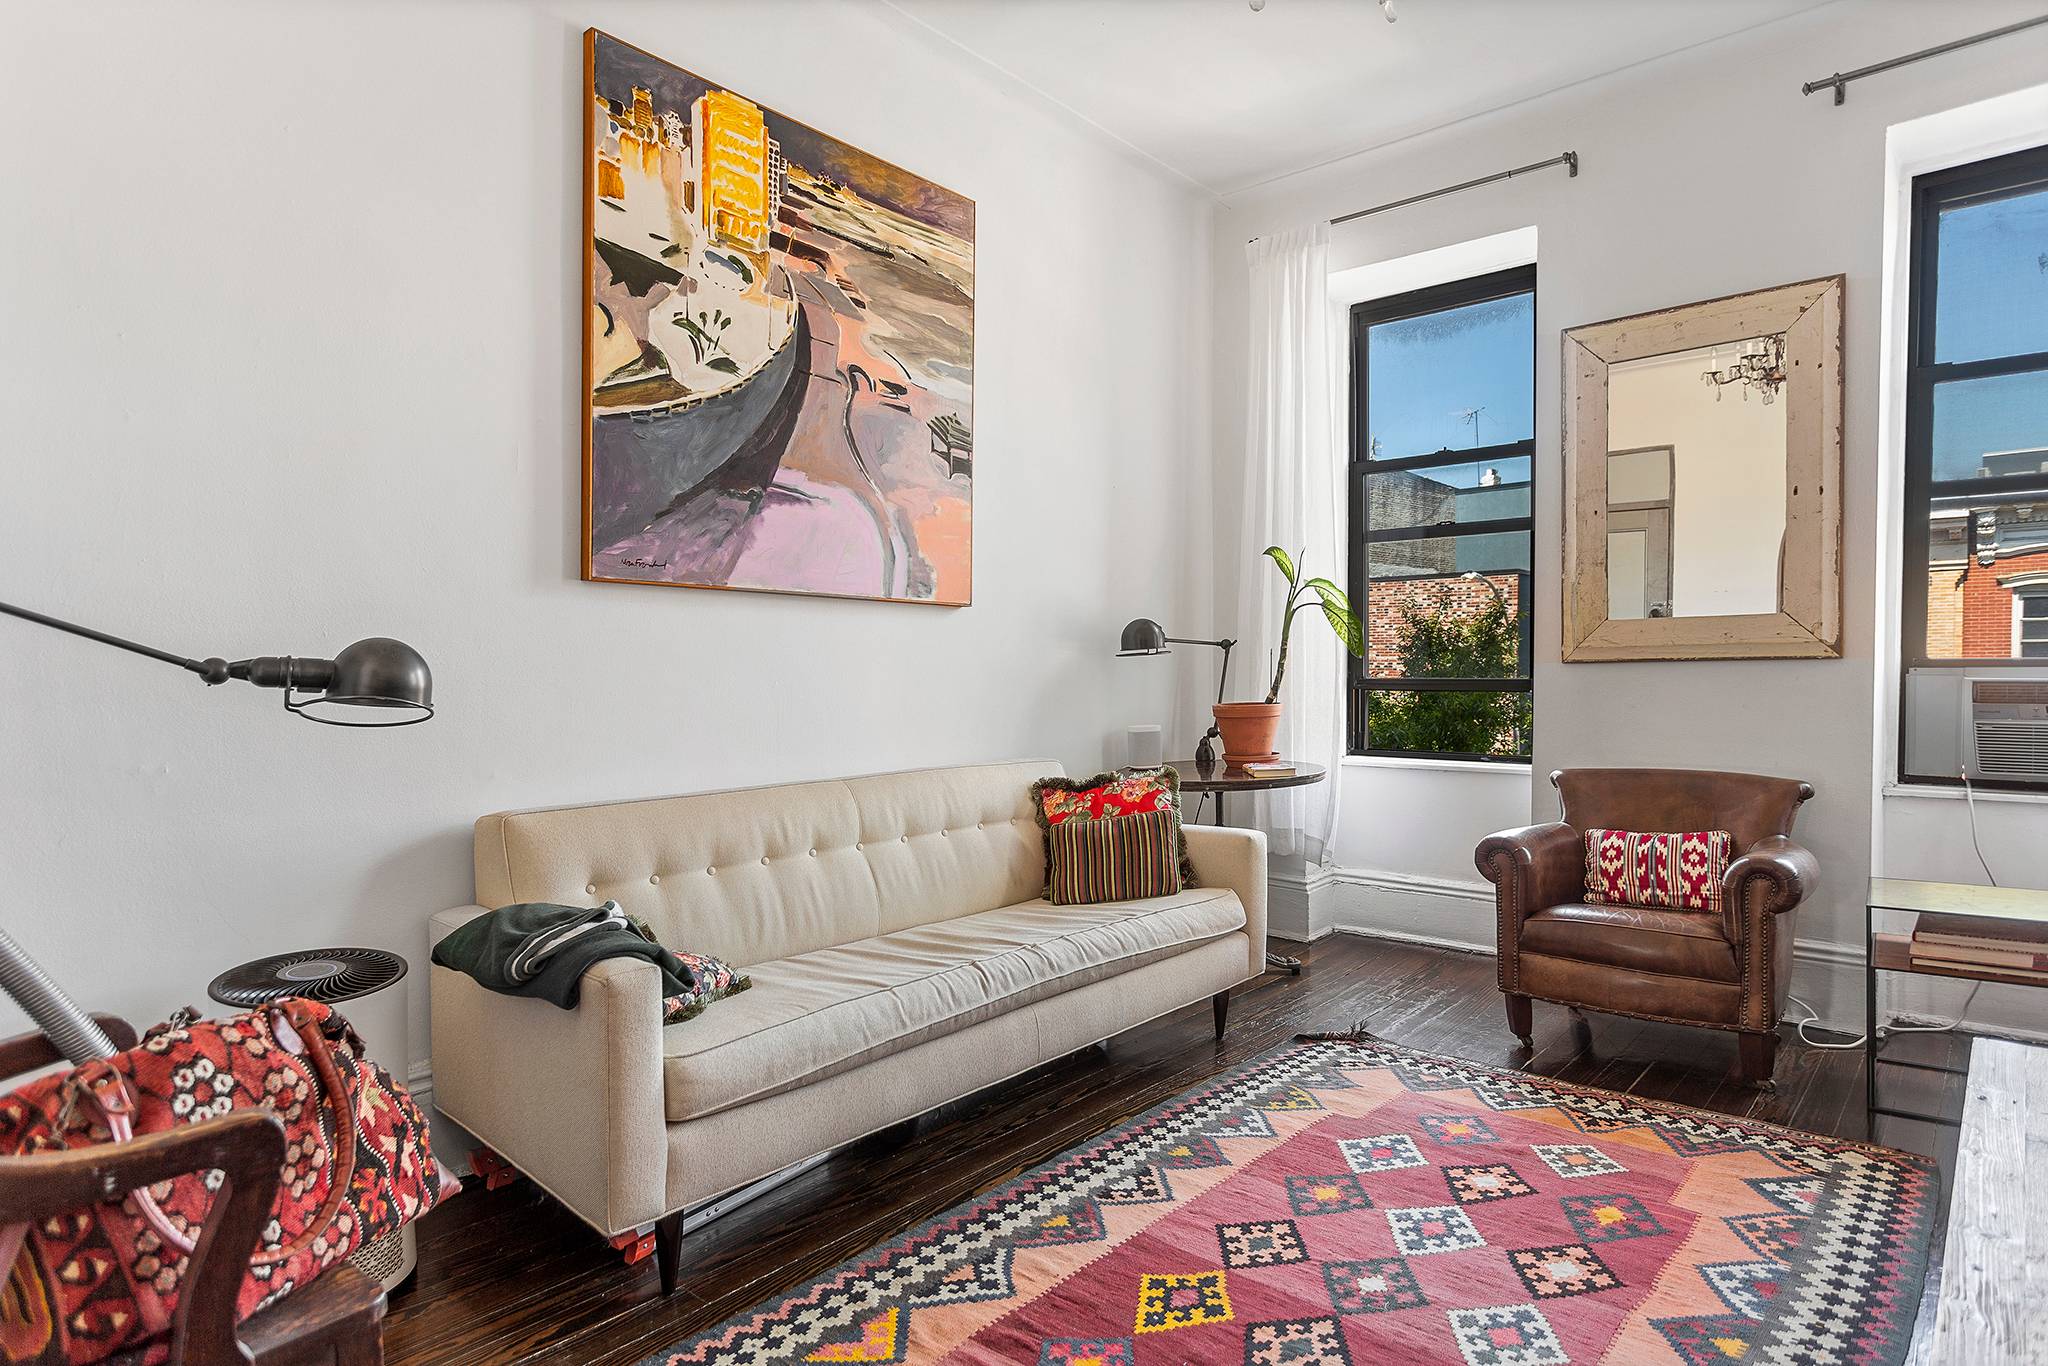 Prewar charm and true character in the heart of Williamsburg.